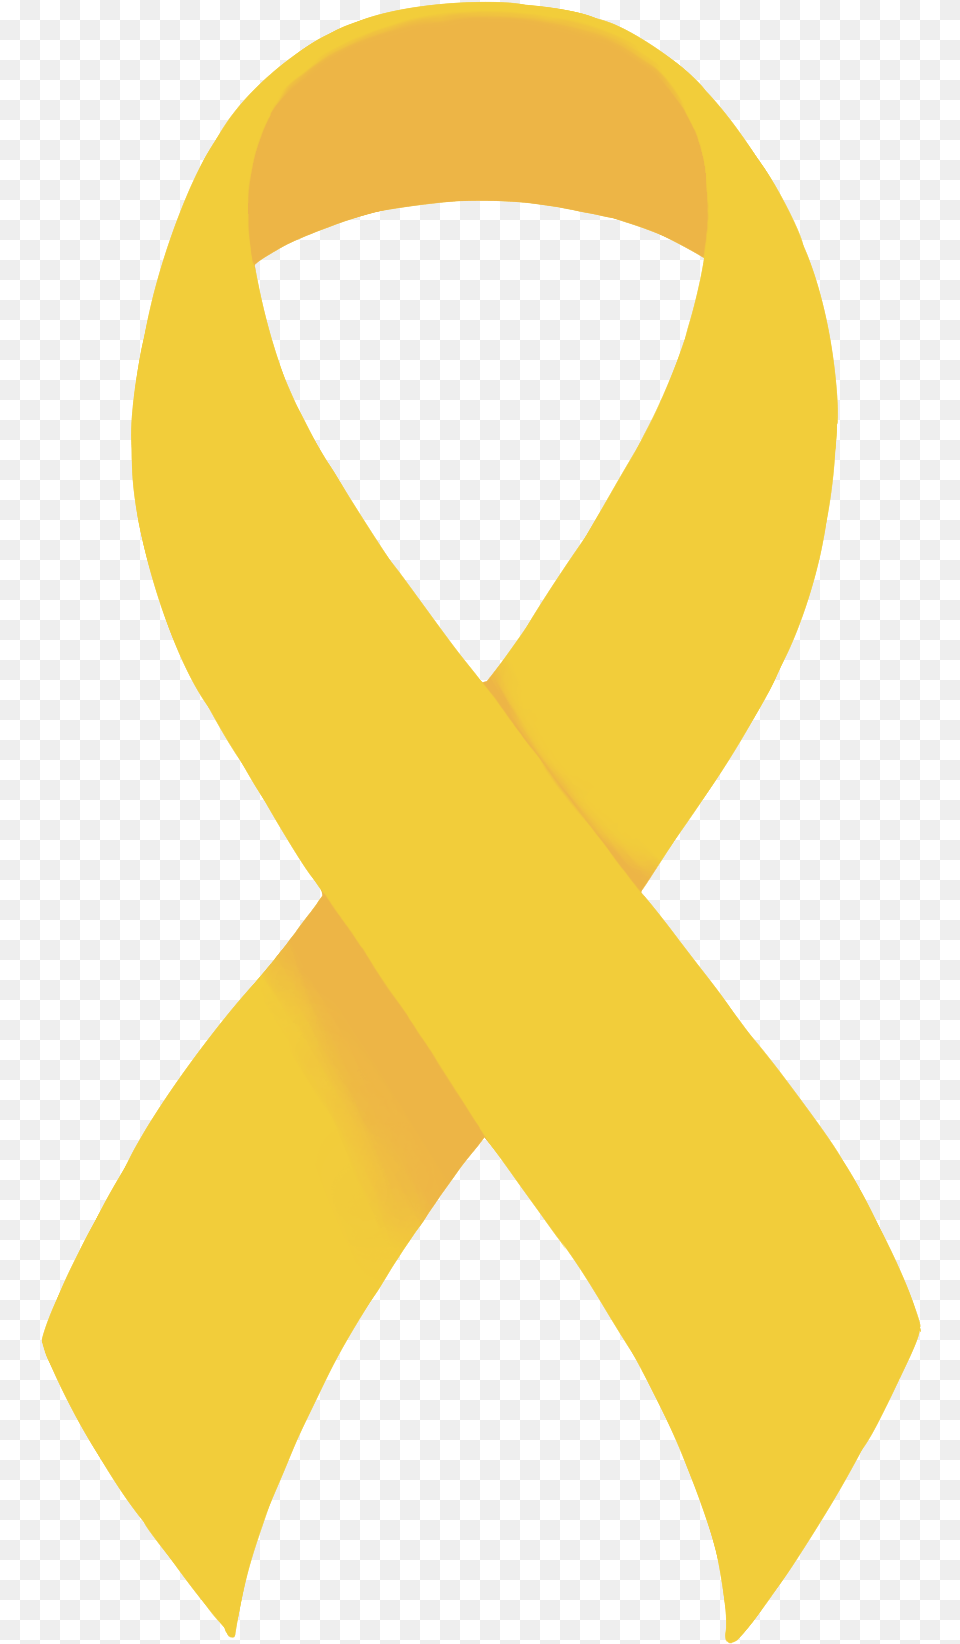 Clip Art A Guide To Colors Catalan Independence Yellow Ribbon, Person, Symbol, Accessories, Formal Wear Png Image